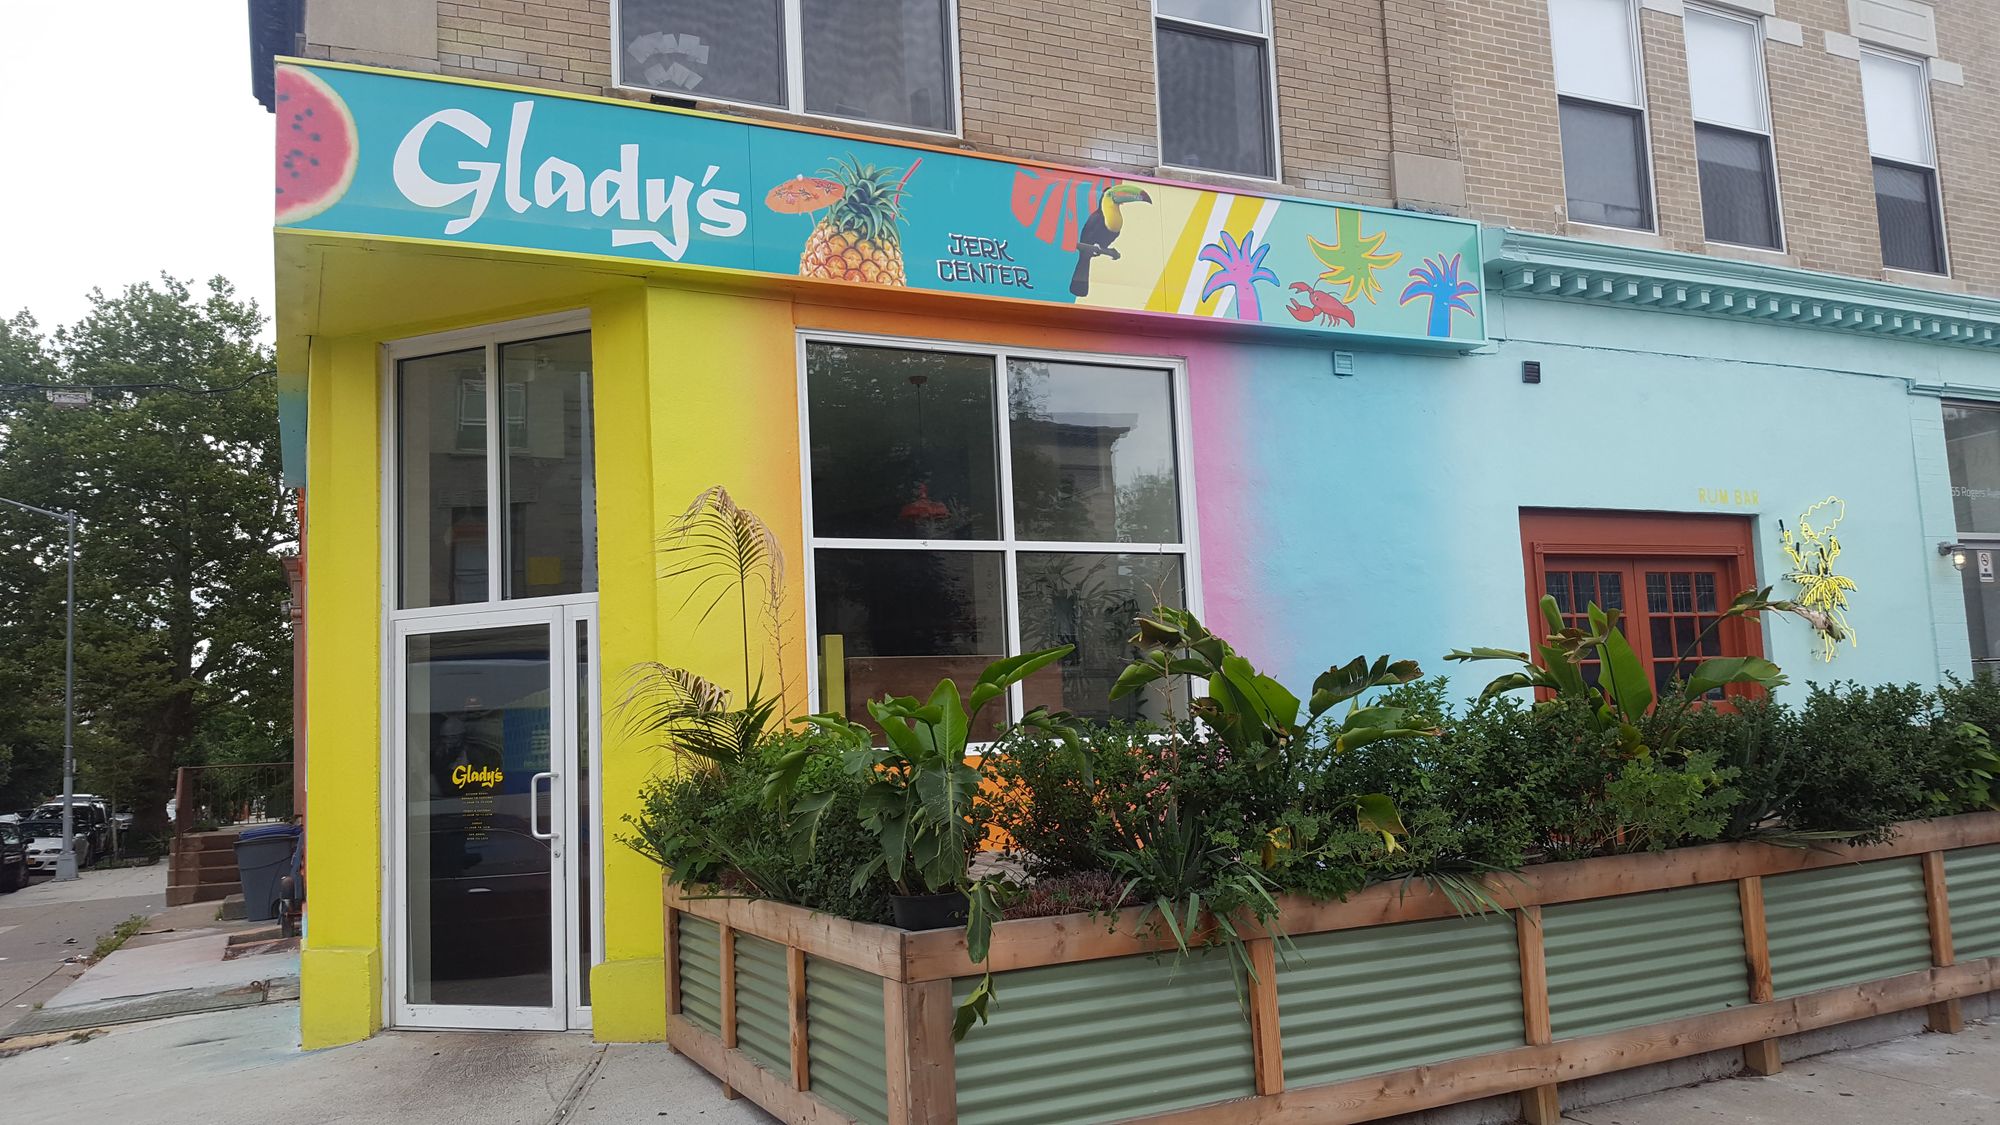 Glady’s Jerk Center: Junior Felix Brings His Caribbean Heritage To The Table